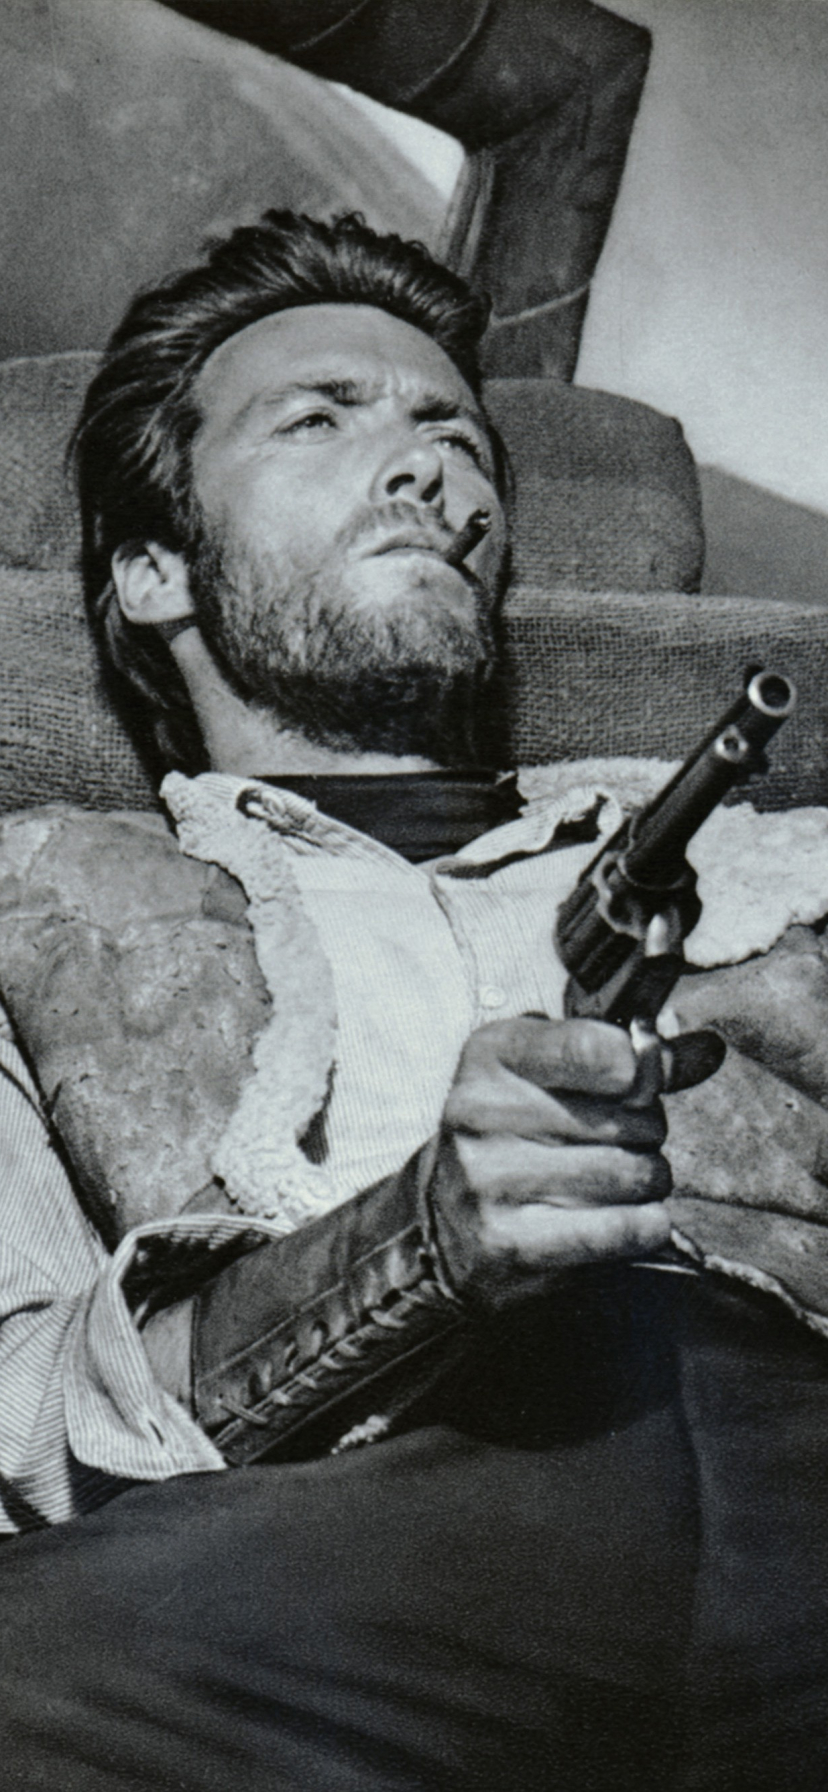 for a few dollars more, movie, clint eastwood